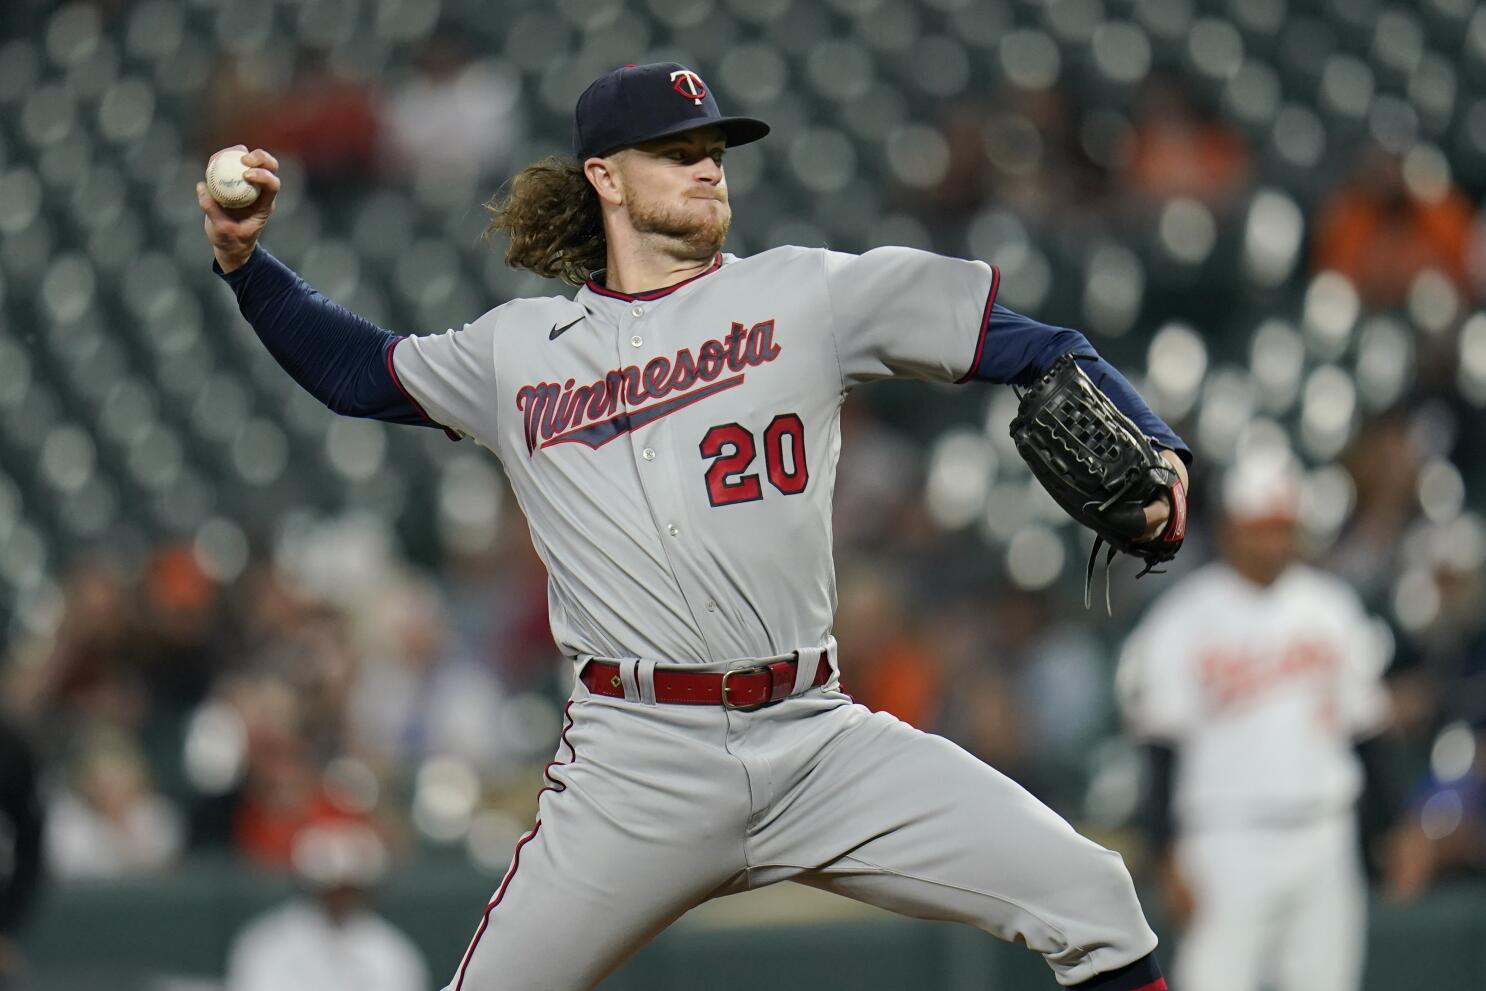 Will hard-throwing Jhoan Duran be the Twins' closer? Only sometimes